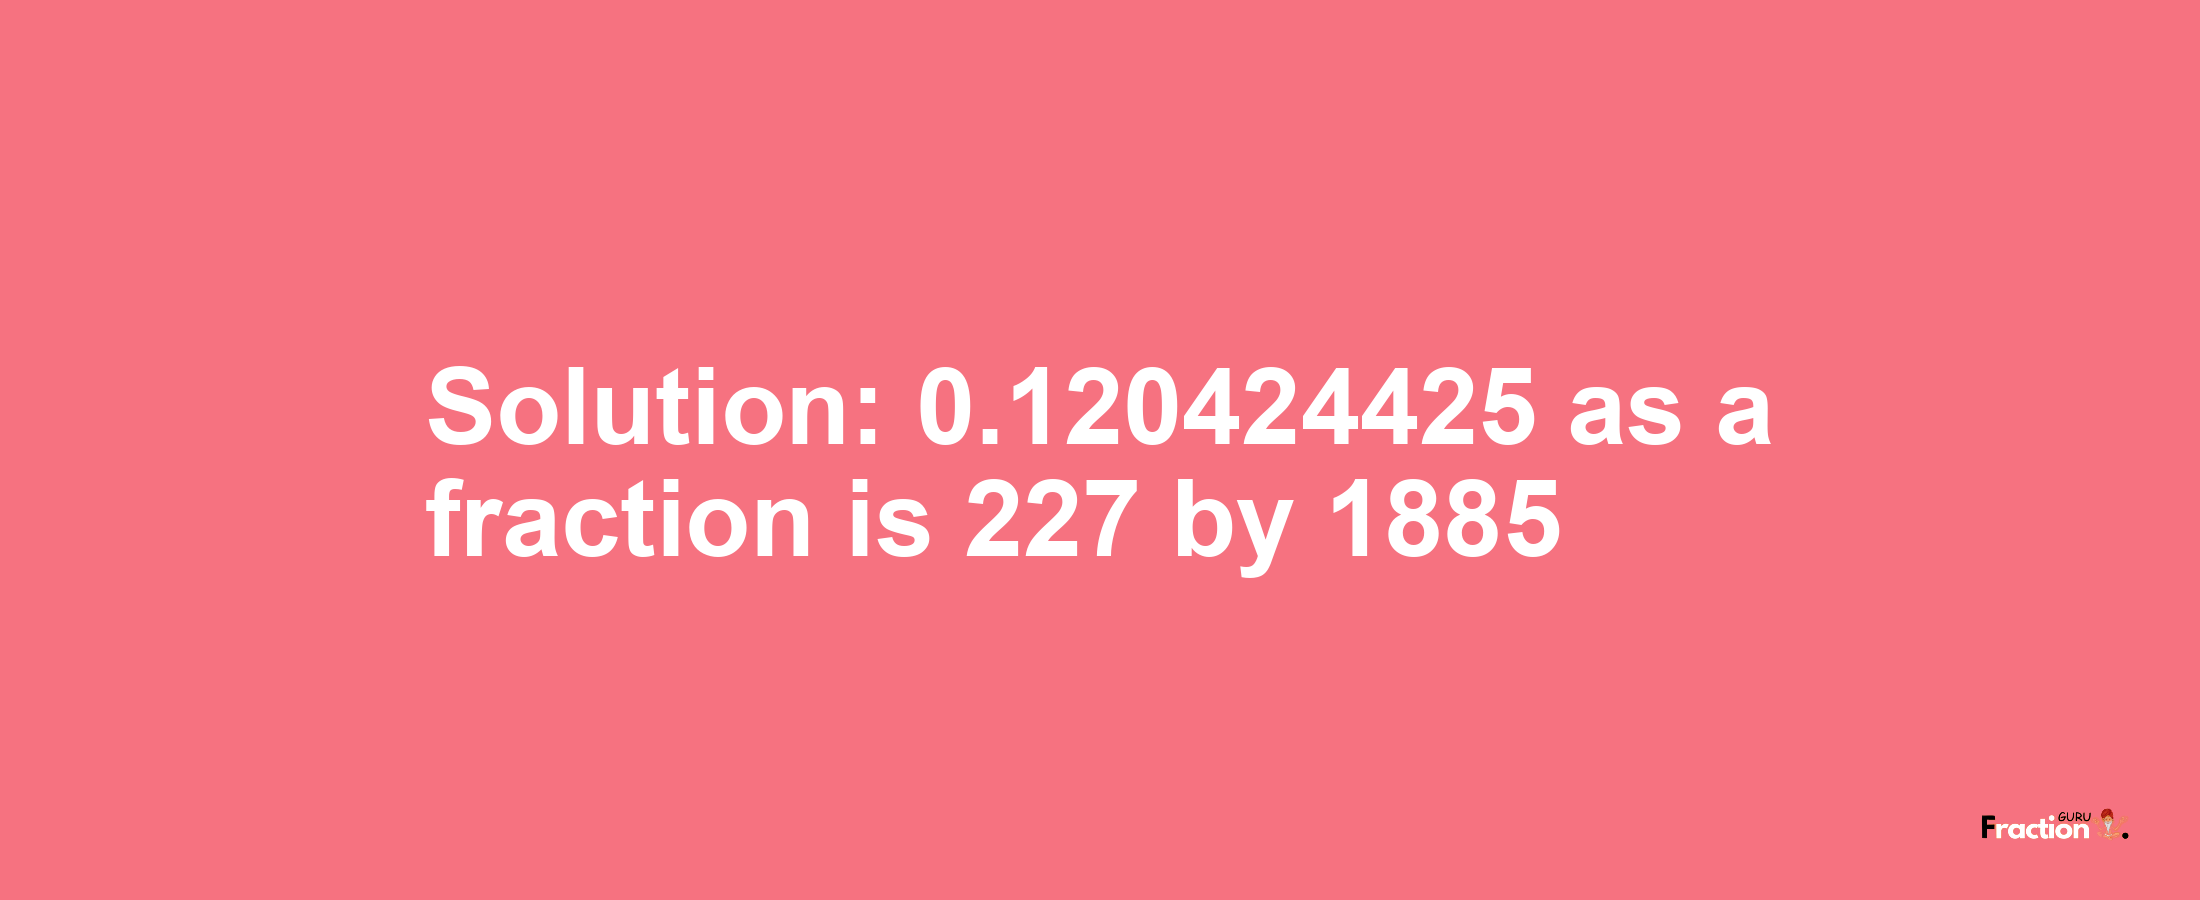 Solution:0.120424425 as a fraction is 227/1885